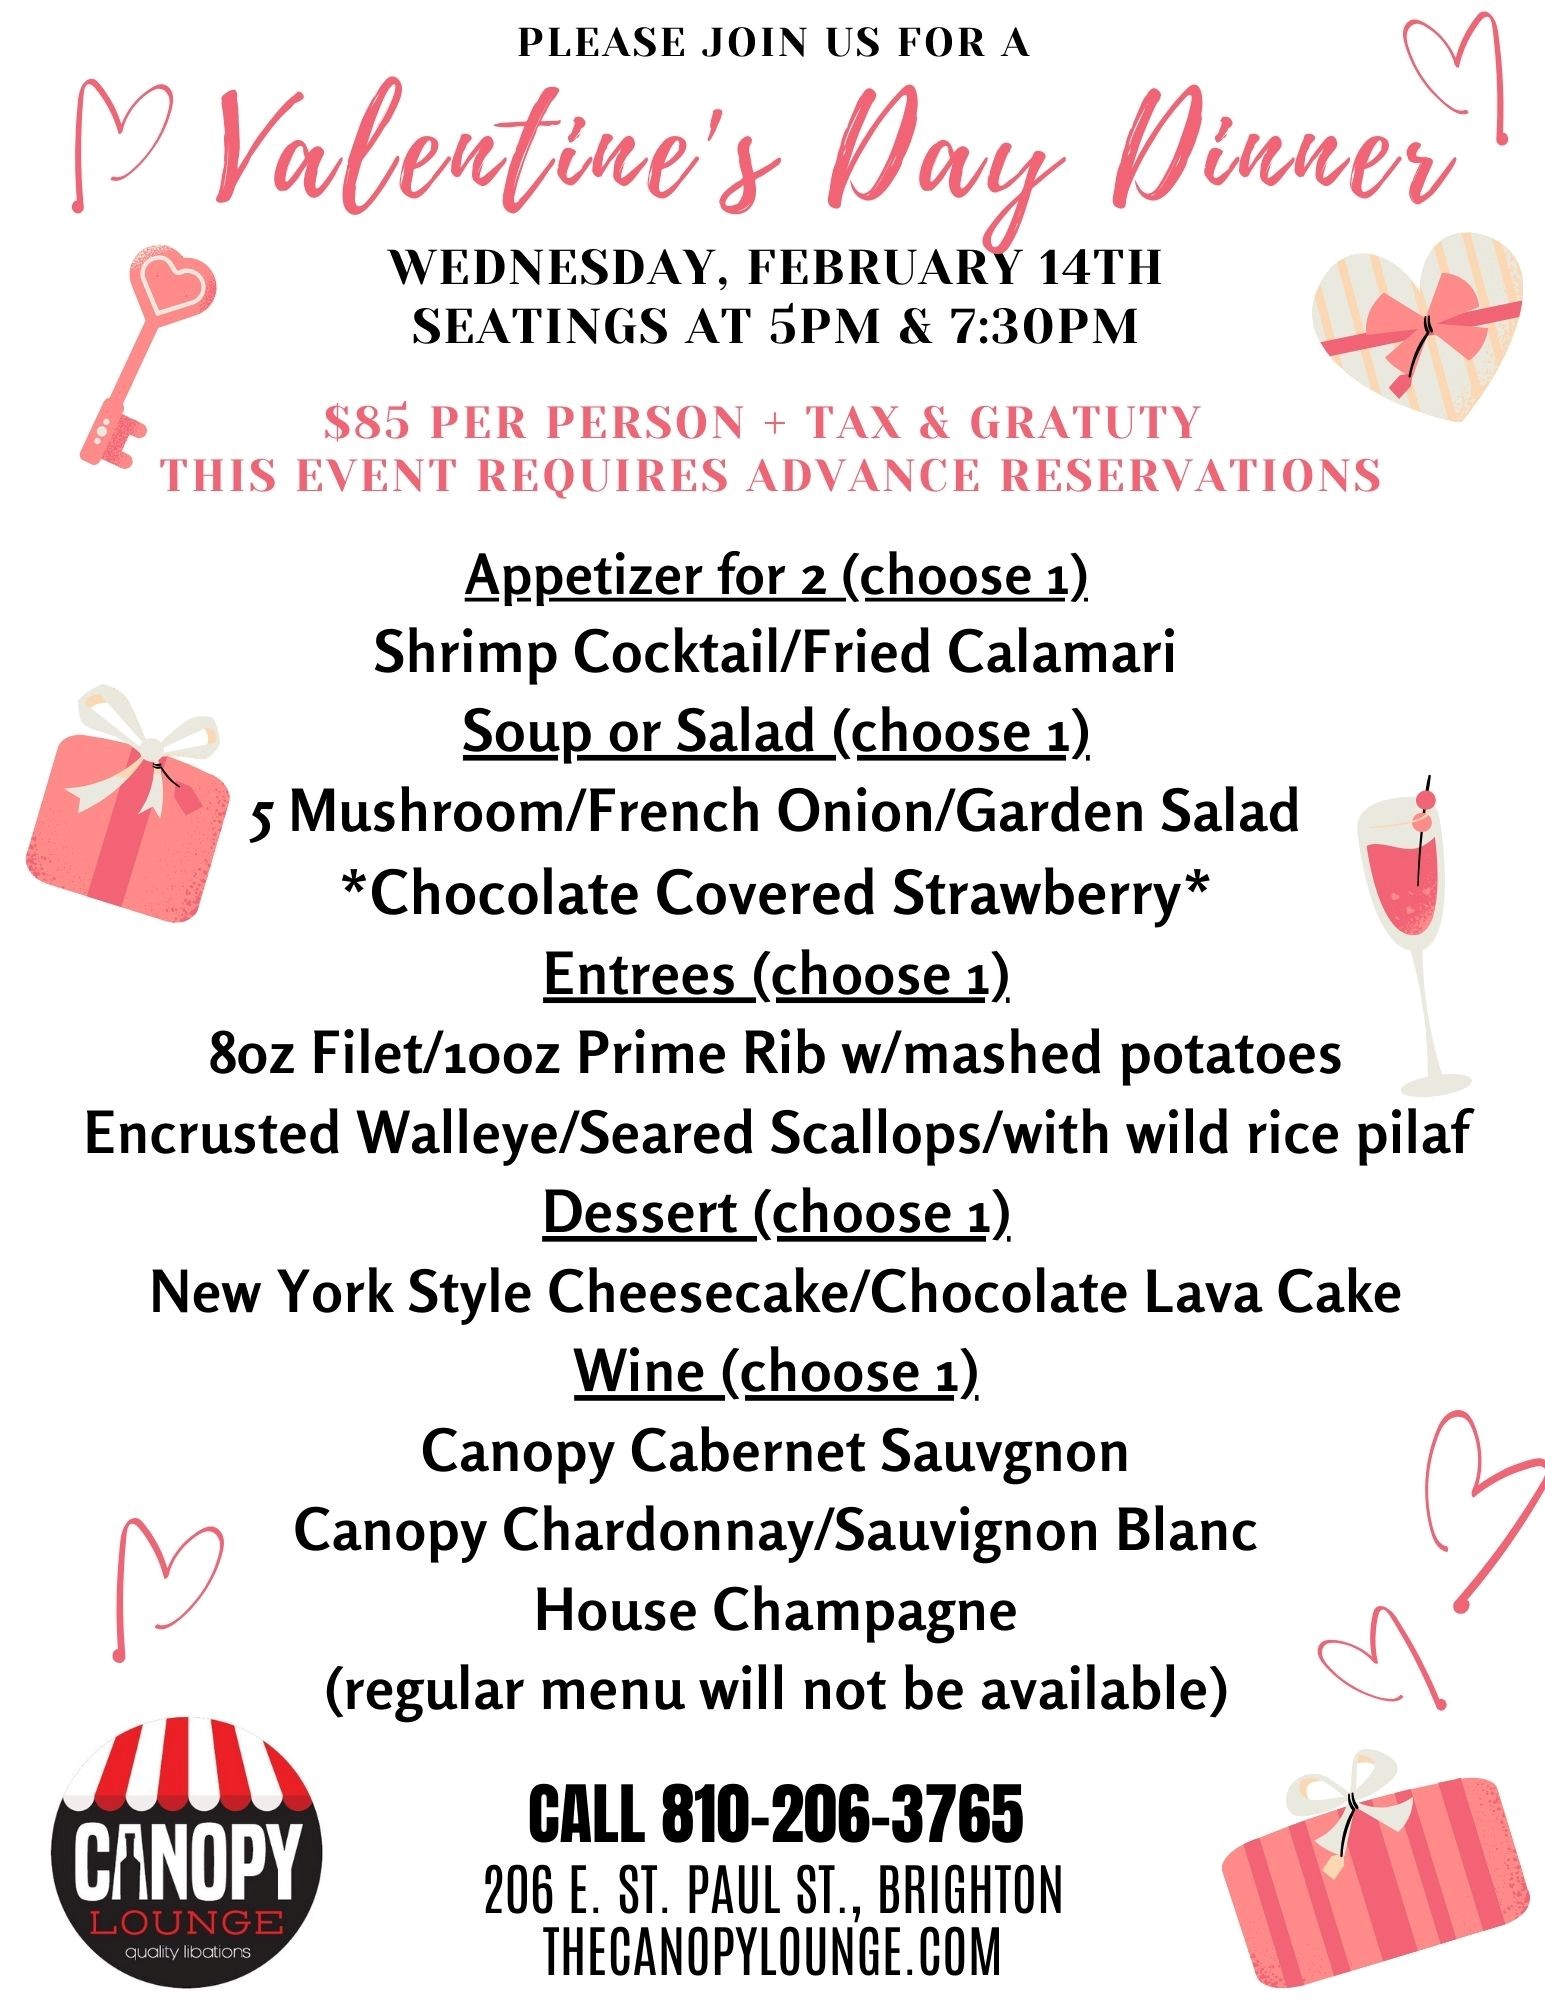 Valentine's Day Dinner. Wednesday, February 14th. Seatings at 5pm and 7:30pm. $85 per person plus tax and gratuity. This event requires advance reservations.